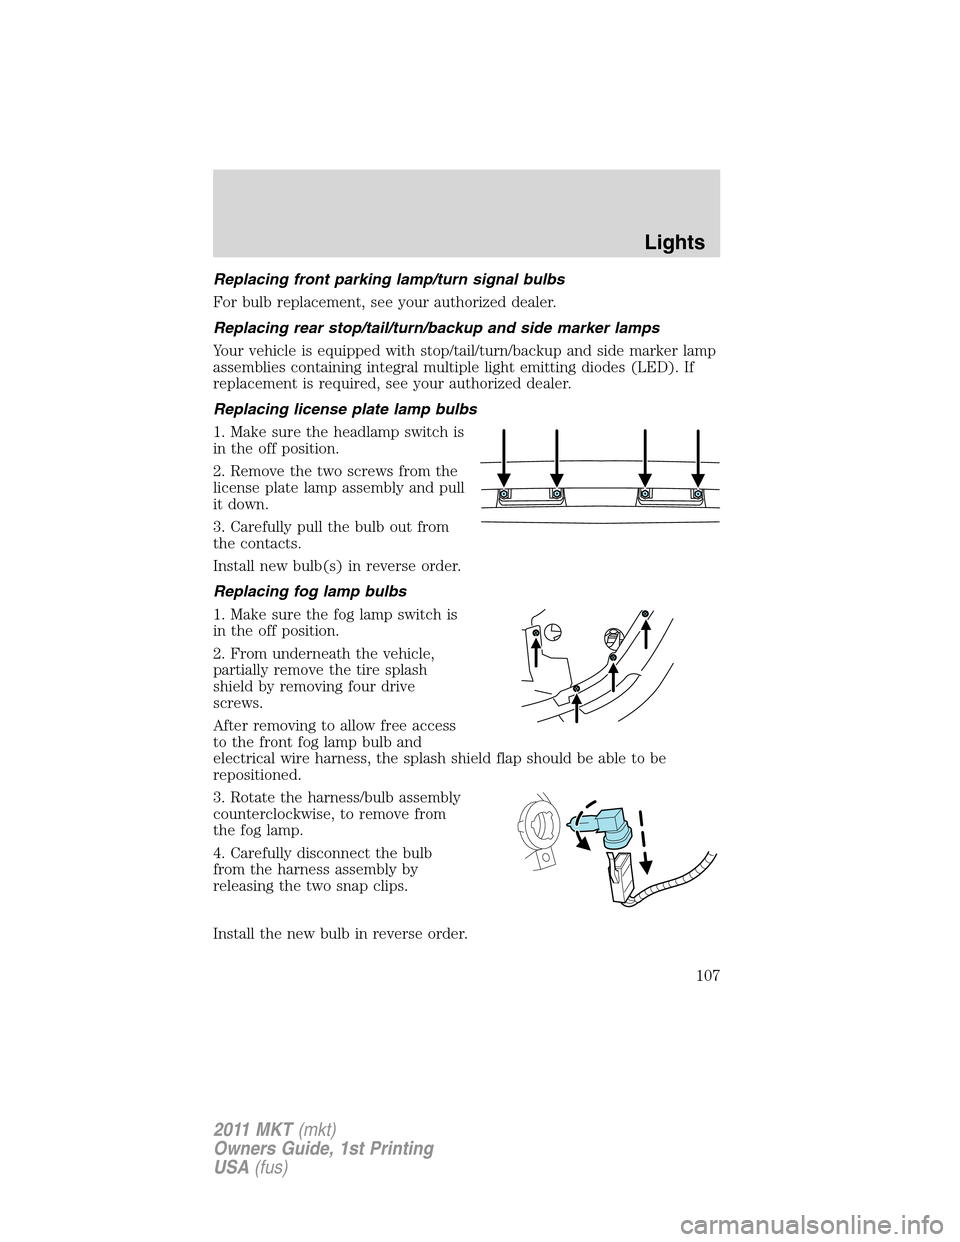 LINCOLN MKT 2011 User Guide Replacing front parking lamp/turn signal bulbs
For bulb replacement, see your authorized dealer.
Replacing rear stop/tail/turn/backup and side marker lamps
Your vehicle is equipped with stop/tail/turn